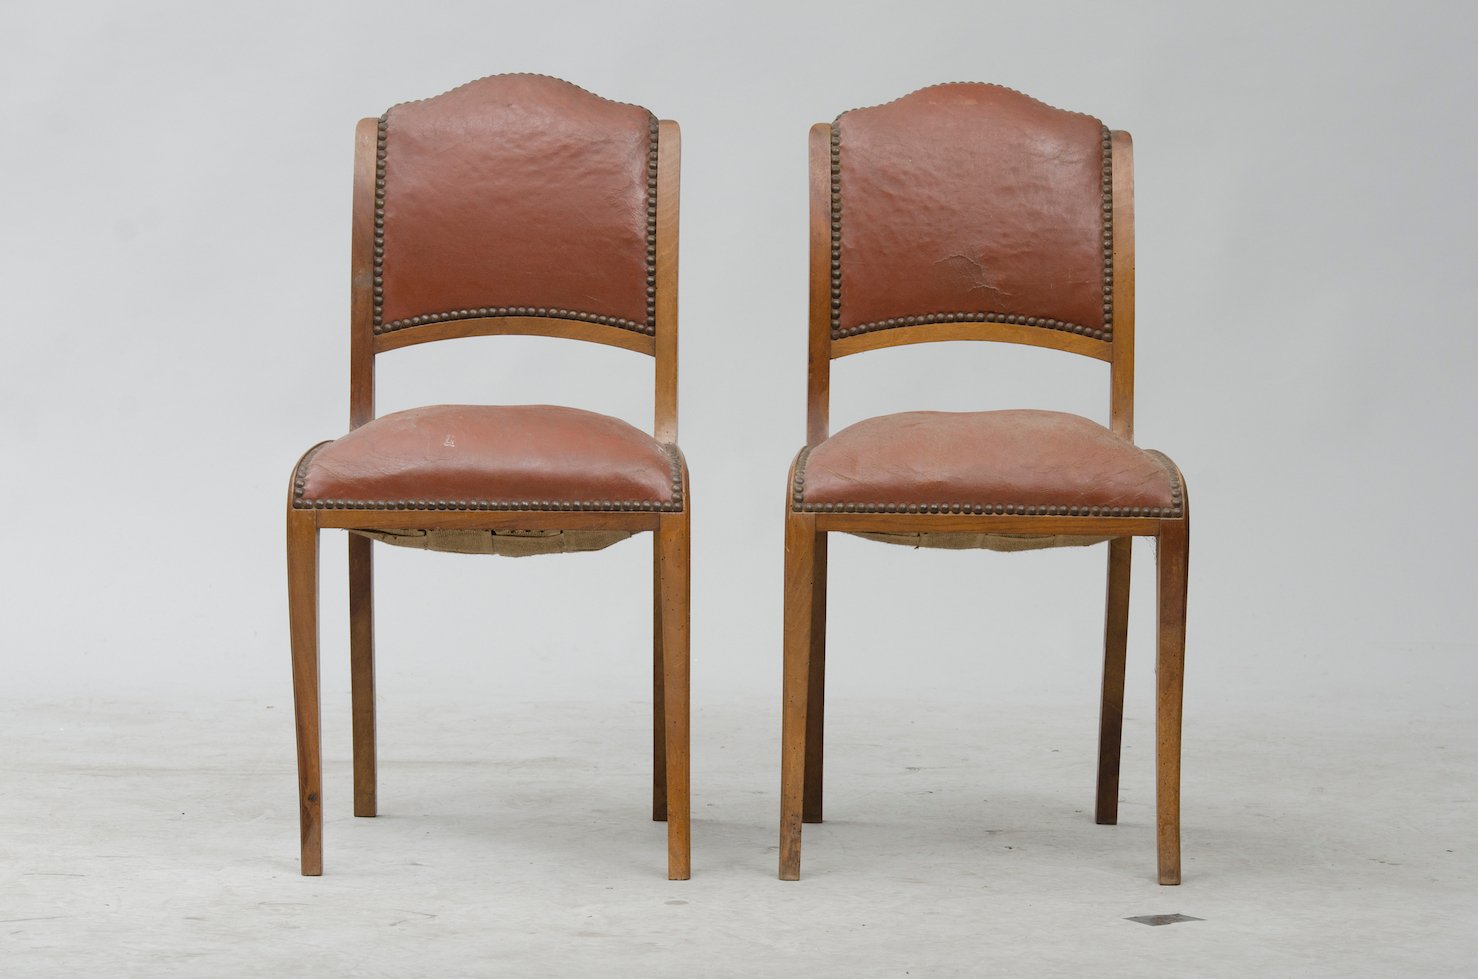 Vintage Art Deco Walnut Dining Chairs, Set of 6 for sale